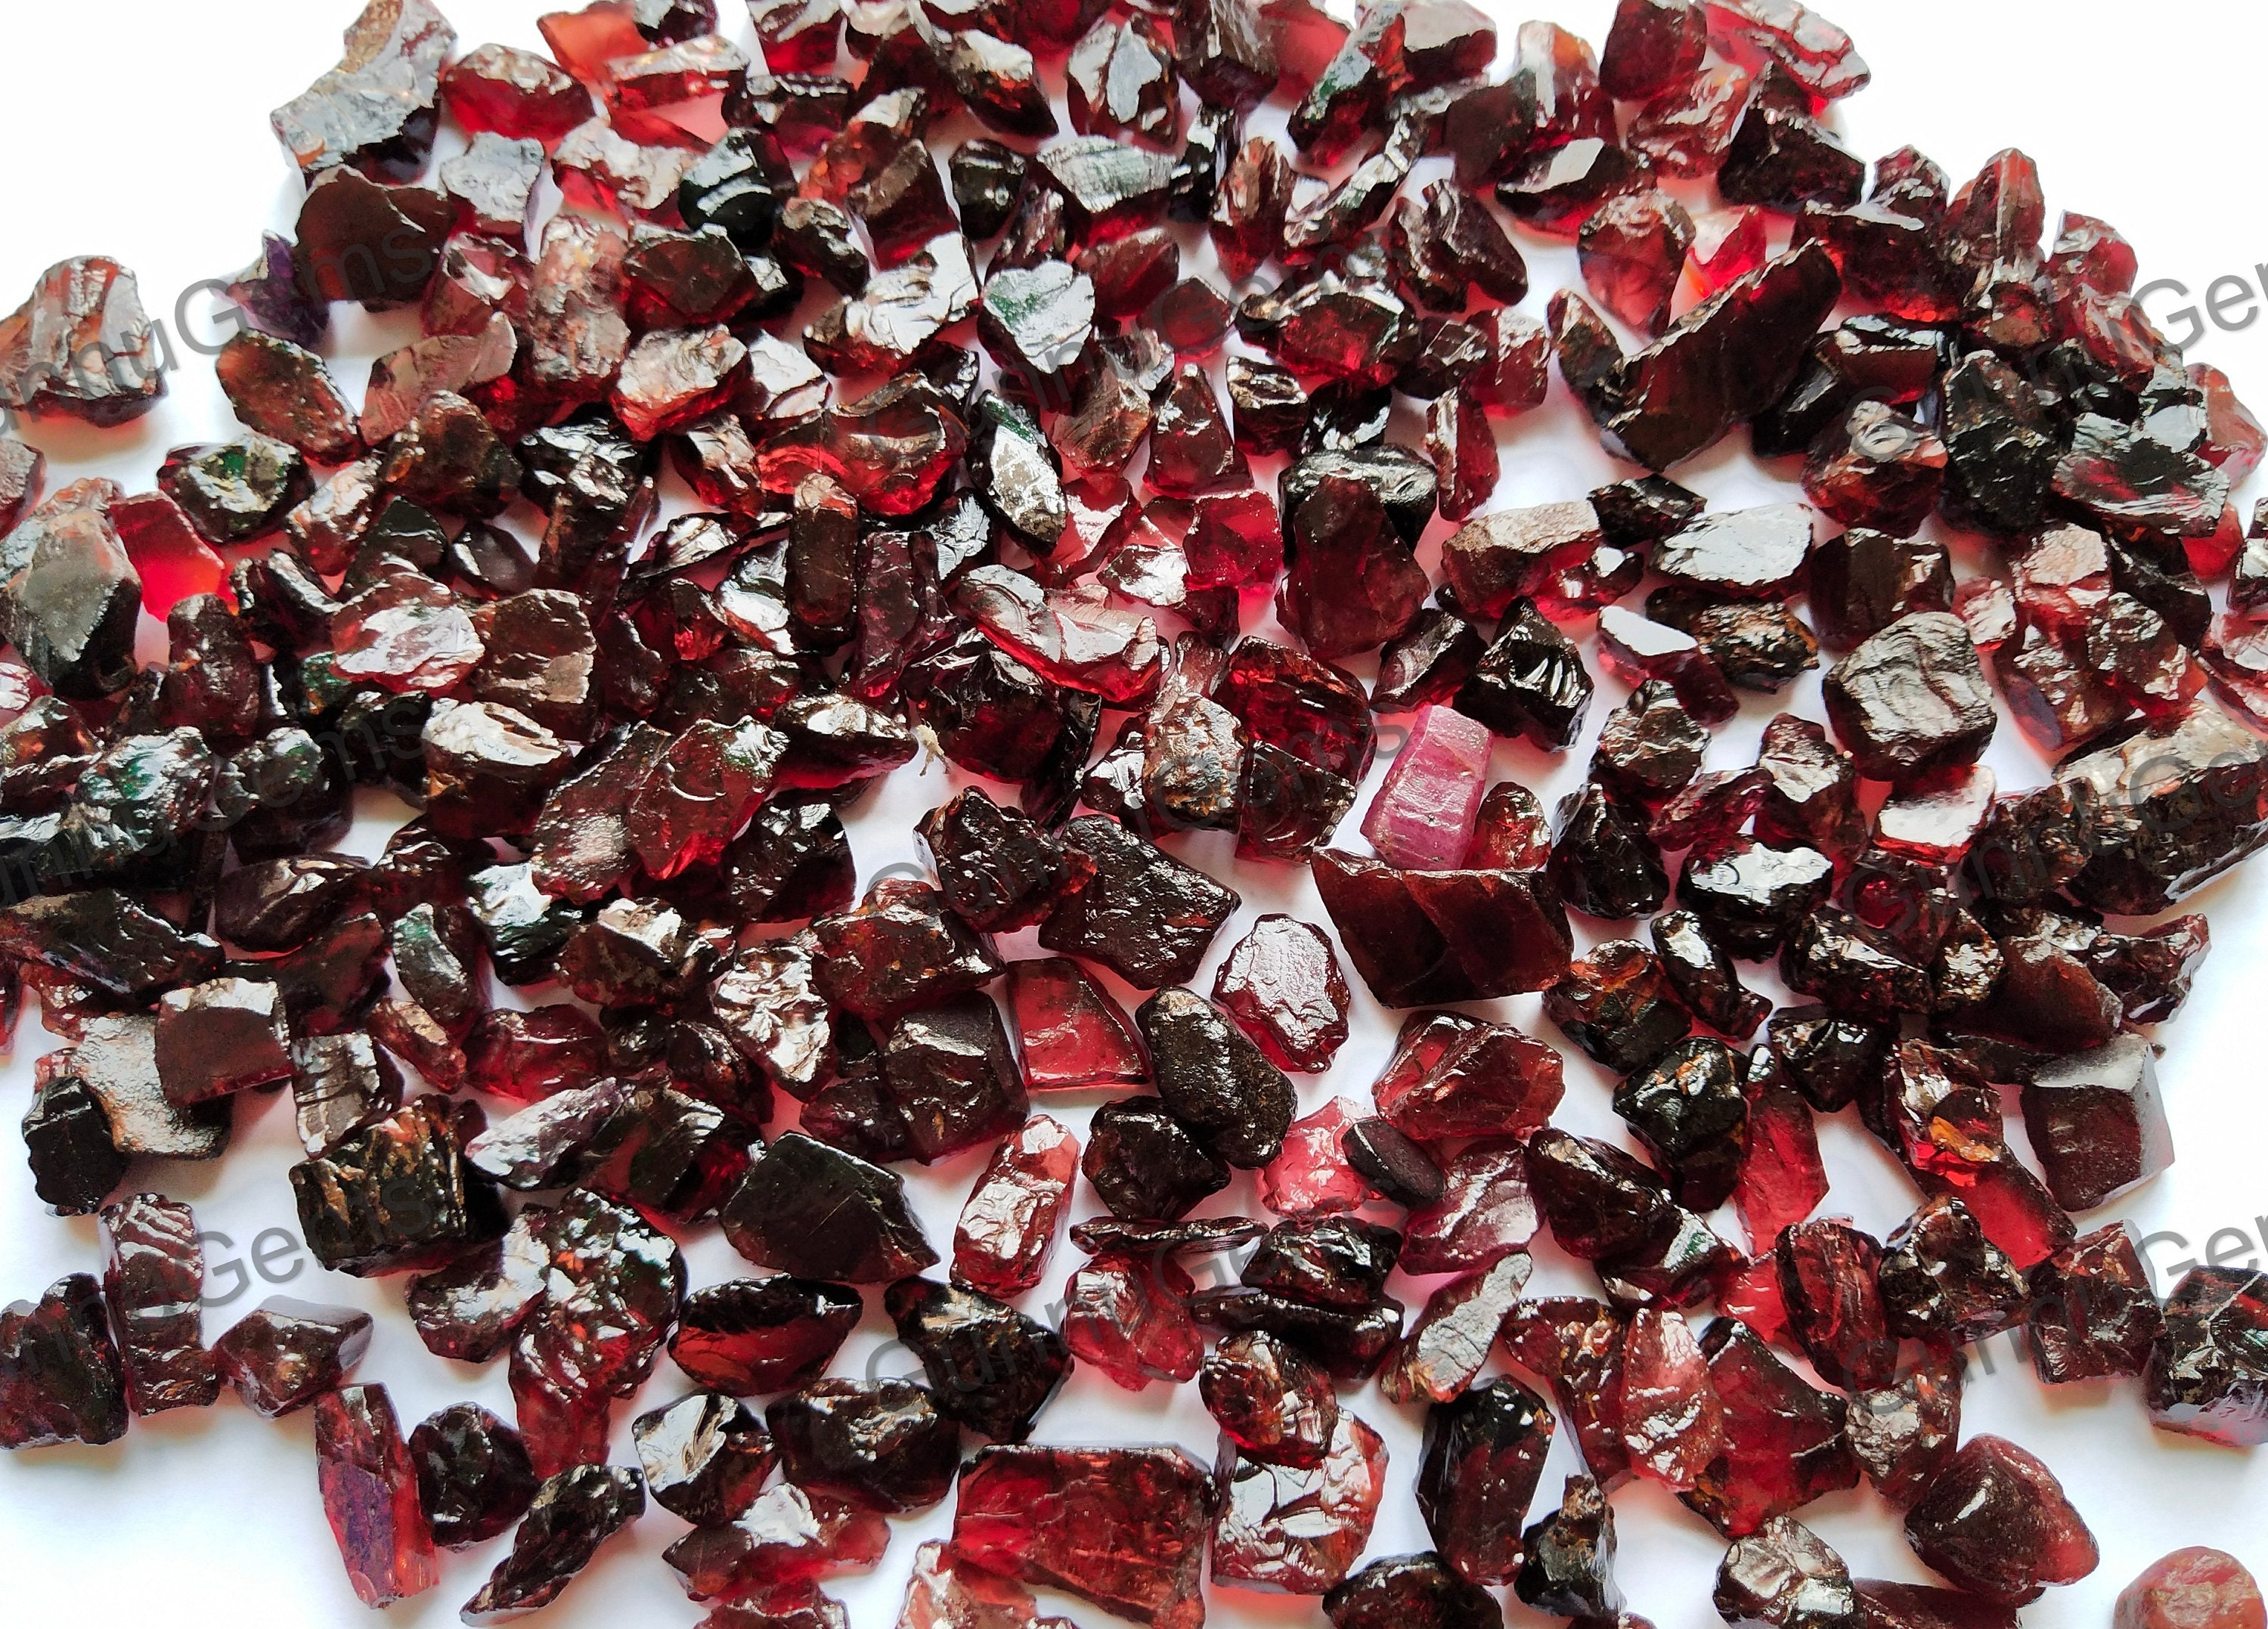  Natural Handcrafted Raw Red Garnet Stone DIY Jewelry Making  Gemstones Wire Wrapping Chakra Healing Crystals DIY Gifts, Birthstones, 50  Carat Lot : Handmade Products